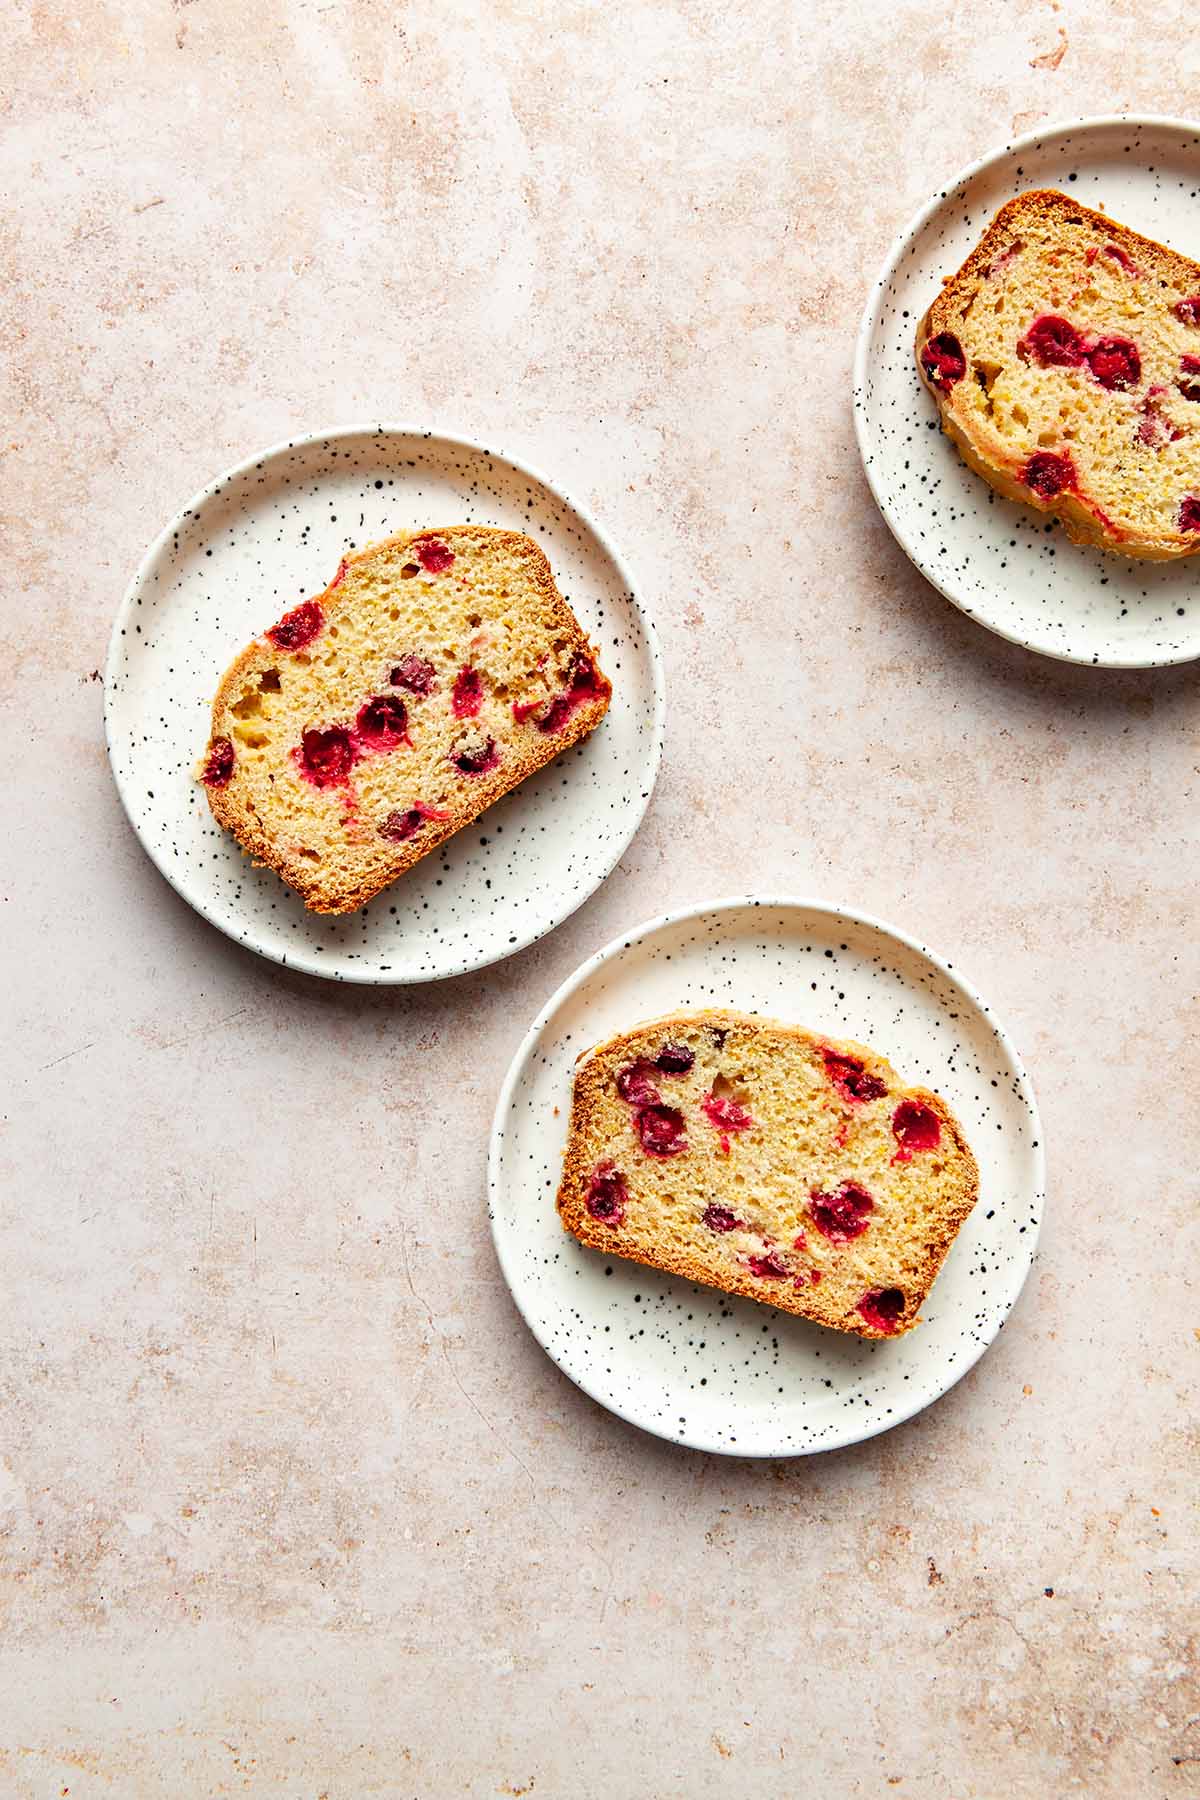 Three slices of cranberry orange loaf on small white speckled plates.